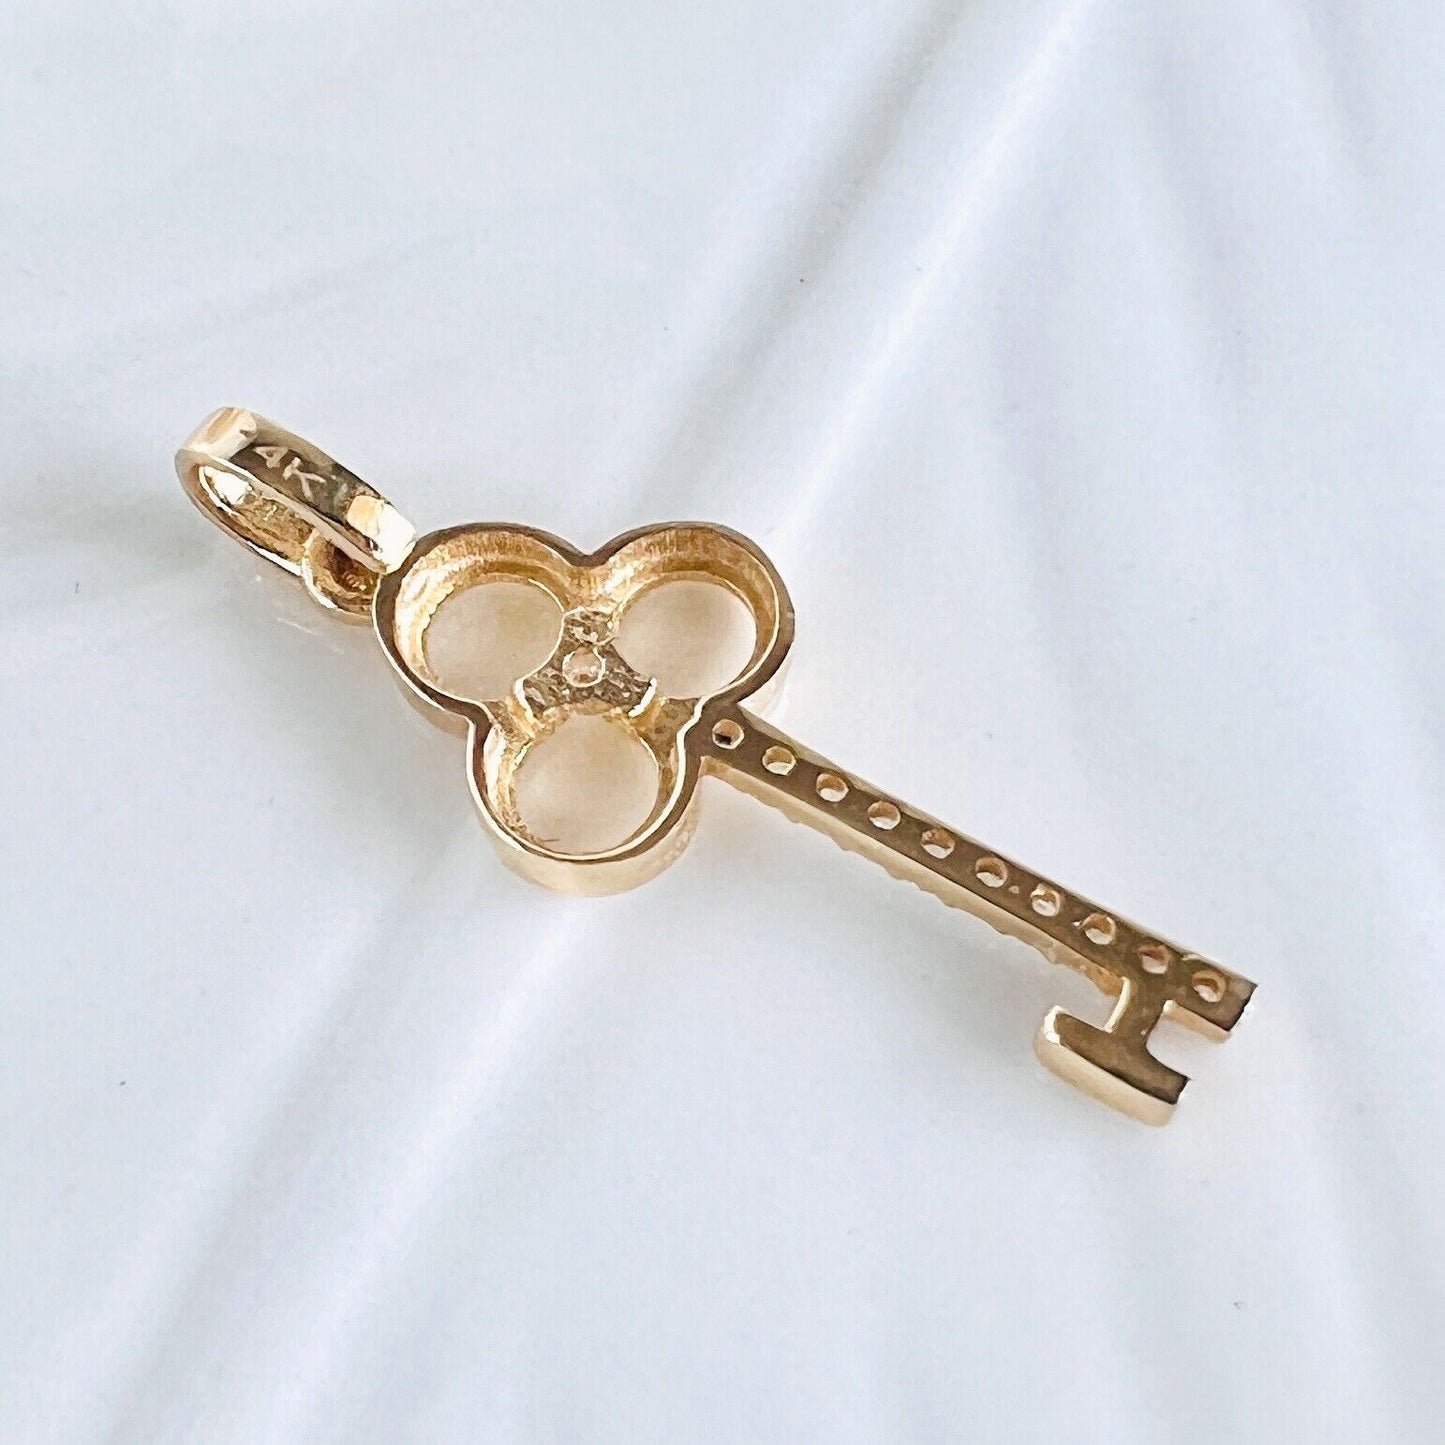 Solid 14K Yellow Gold Key to Your Heart CZ Charm/Pendant, New